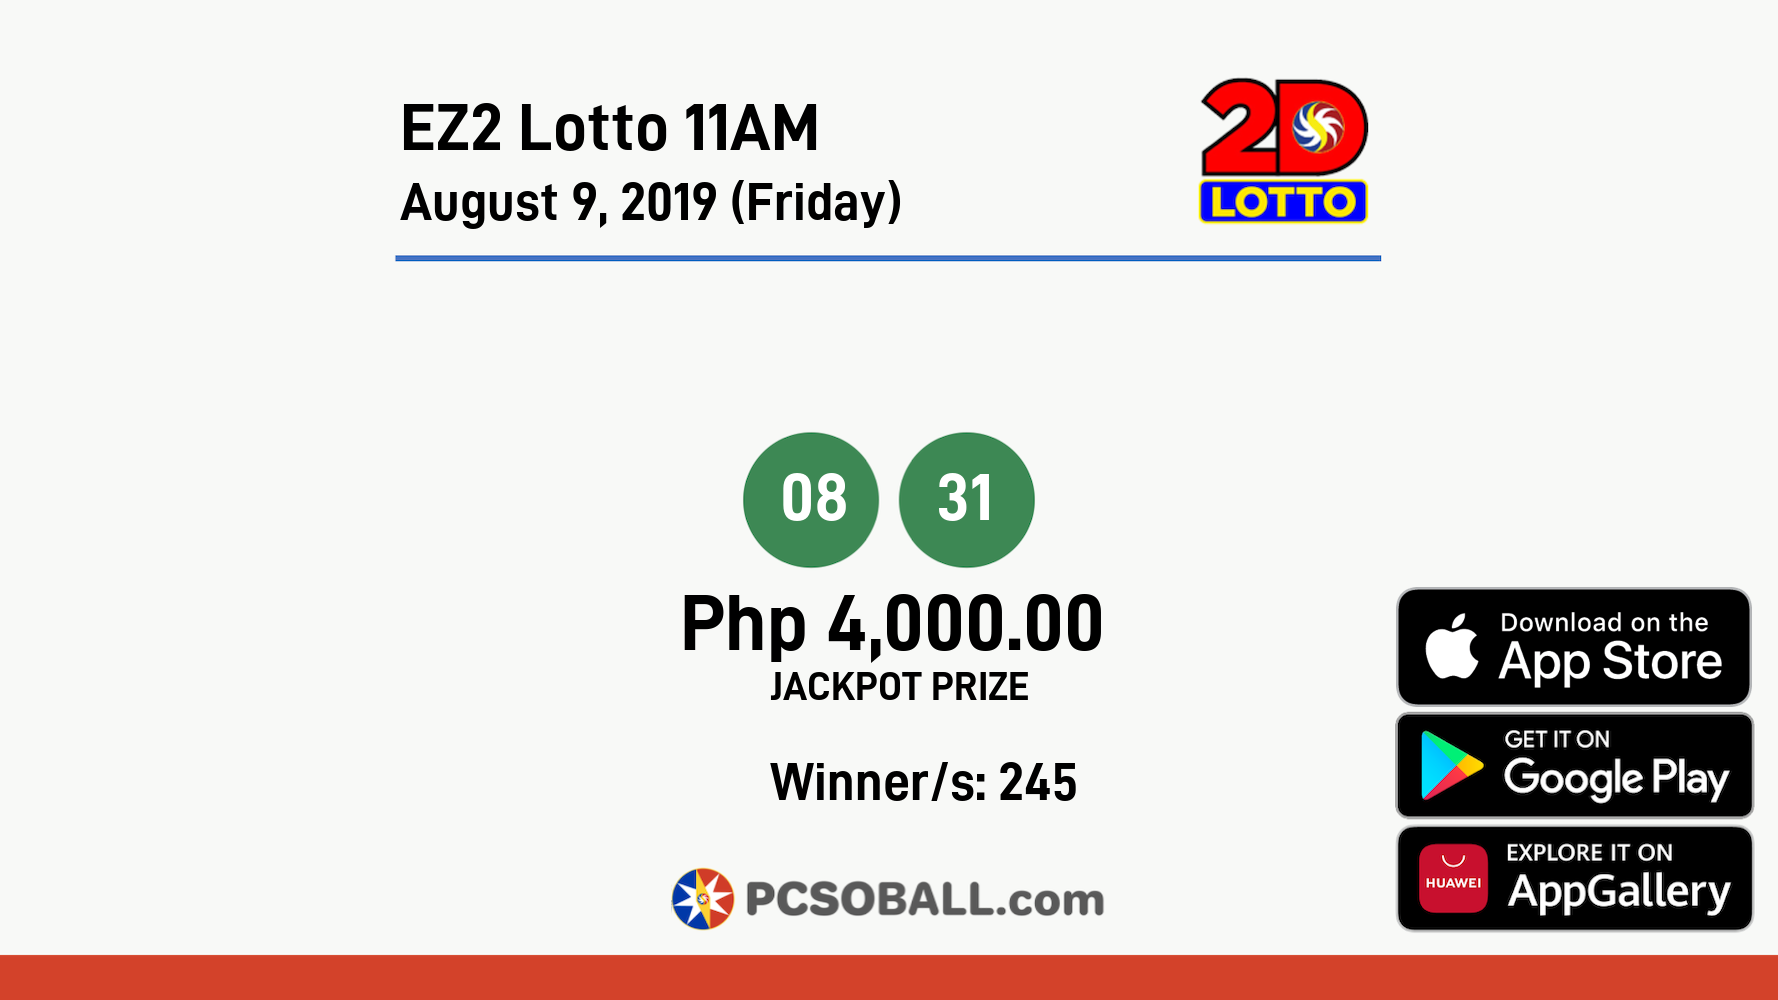 EZ2 Lotto 11AM August 9, 2019 (Friday) Result